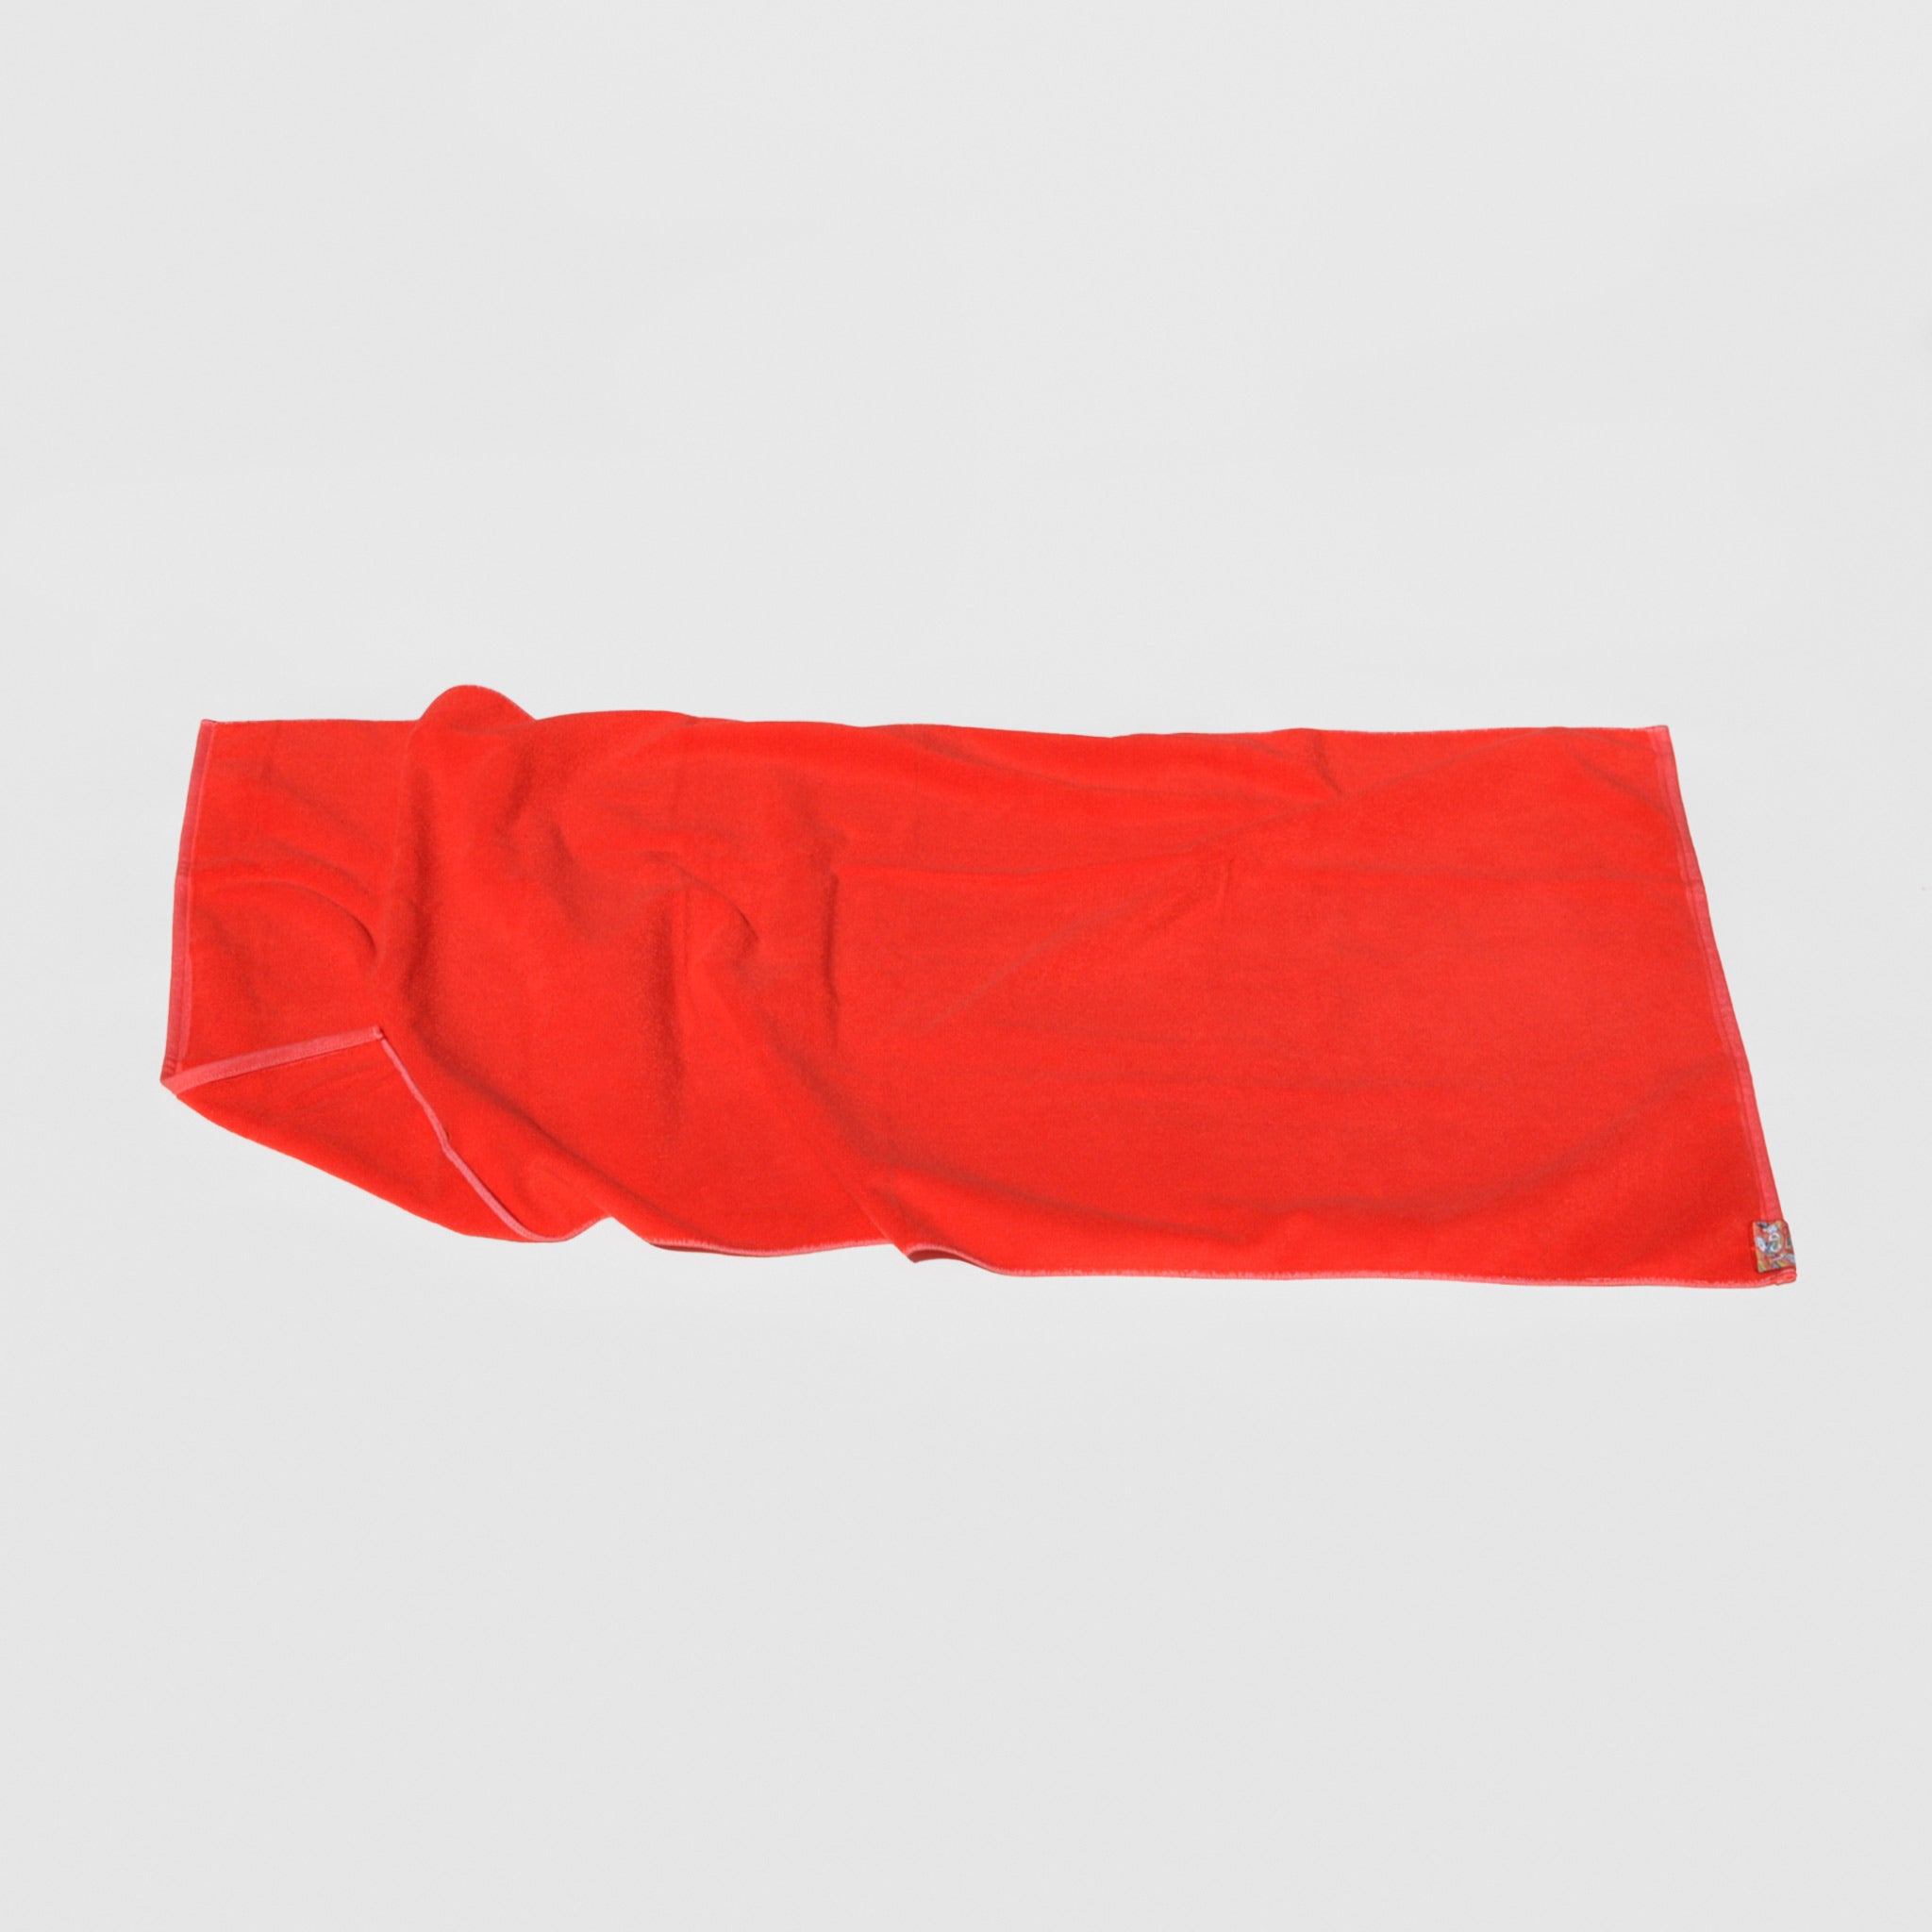 Full image of the jacquard beach & bath towel in light red by LCD.